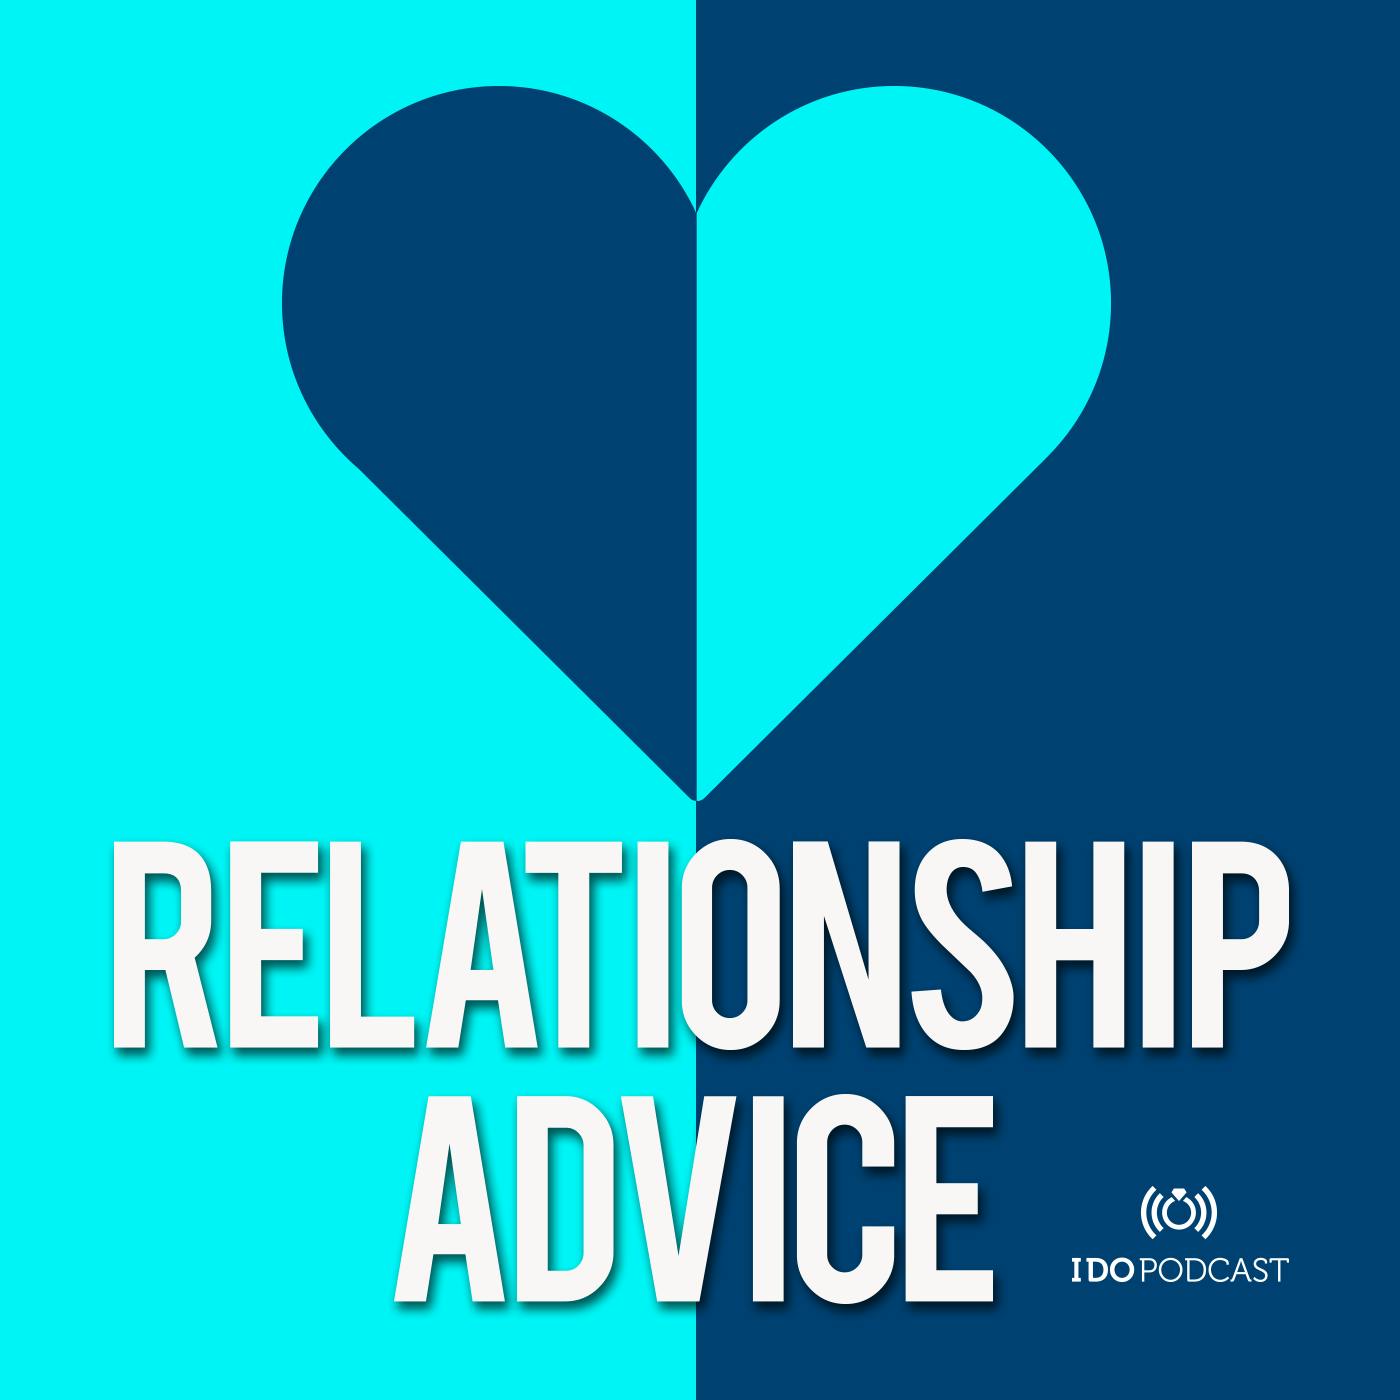 317: How To Have A Peaceful Divorce or Separation